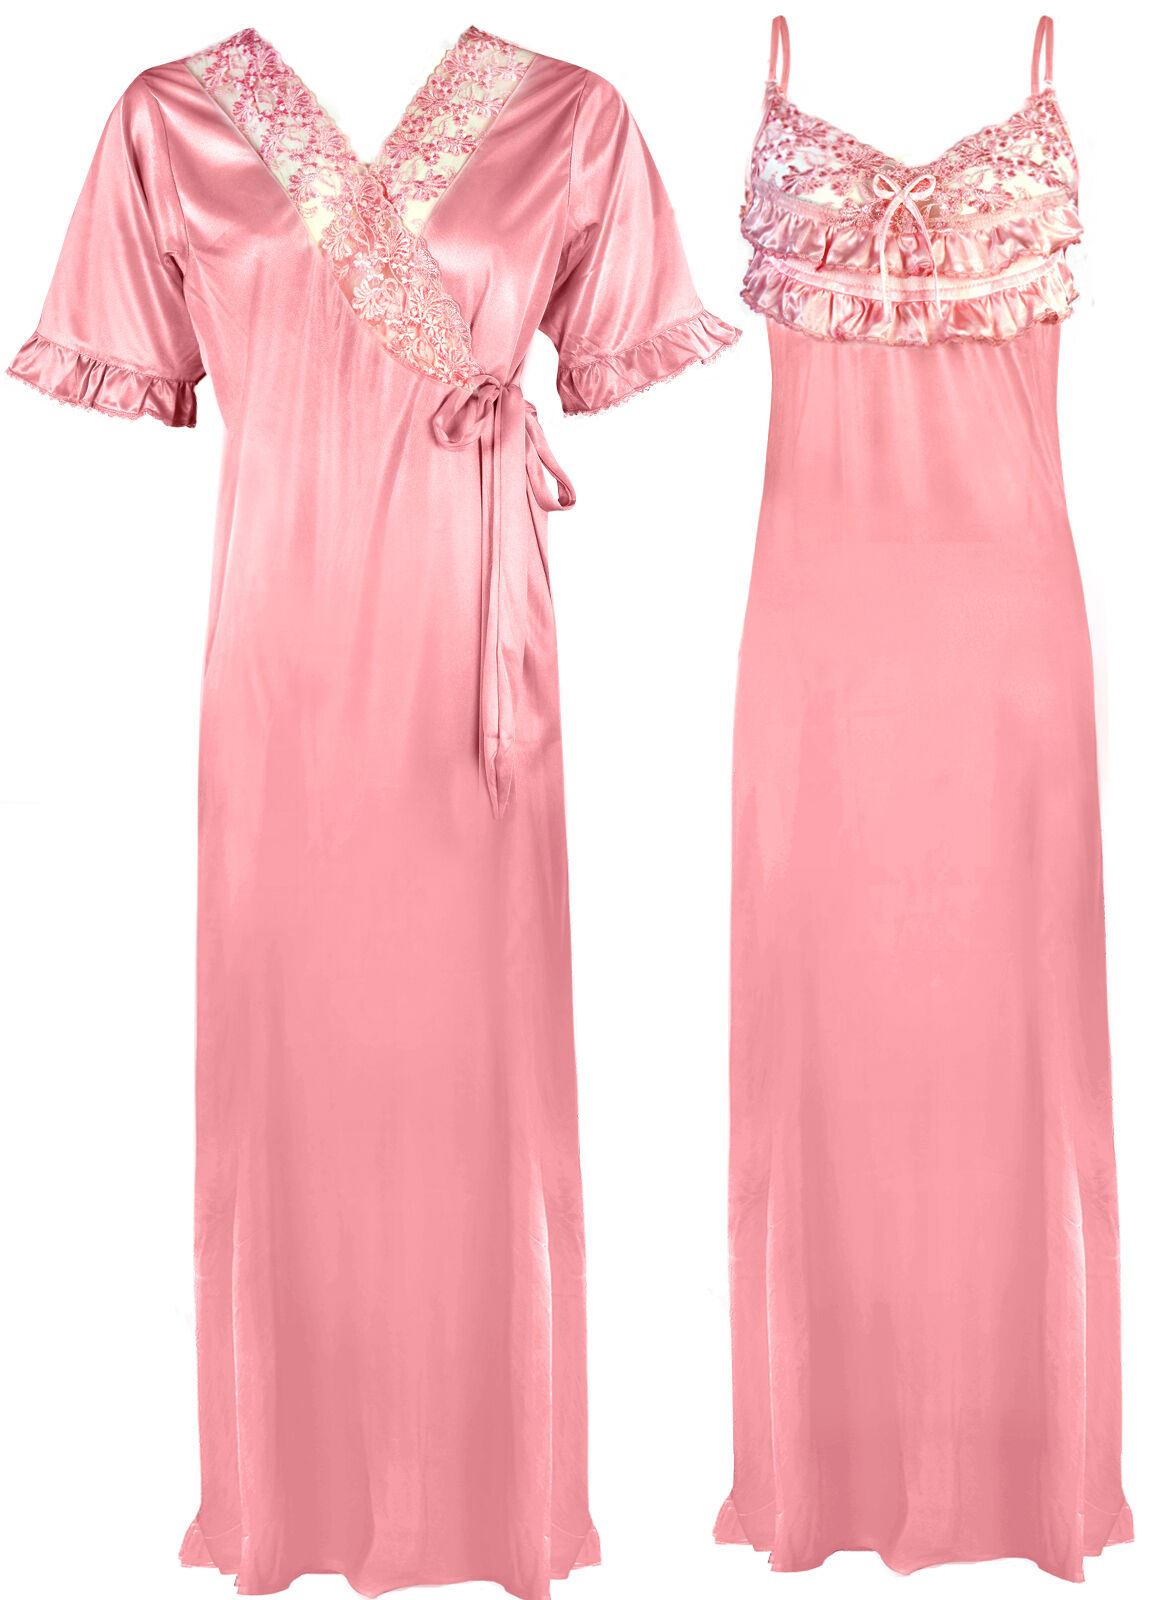 Baby Pink / One Size Satin Nighty And Robe 2 Pcs Nightdress The Orange Tags